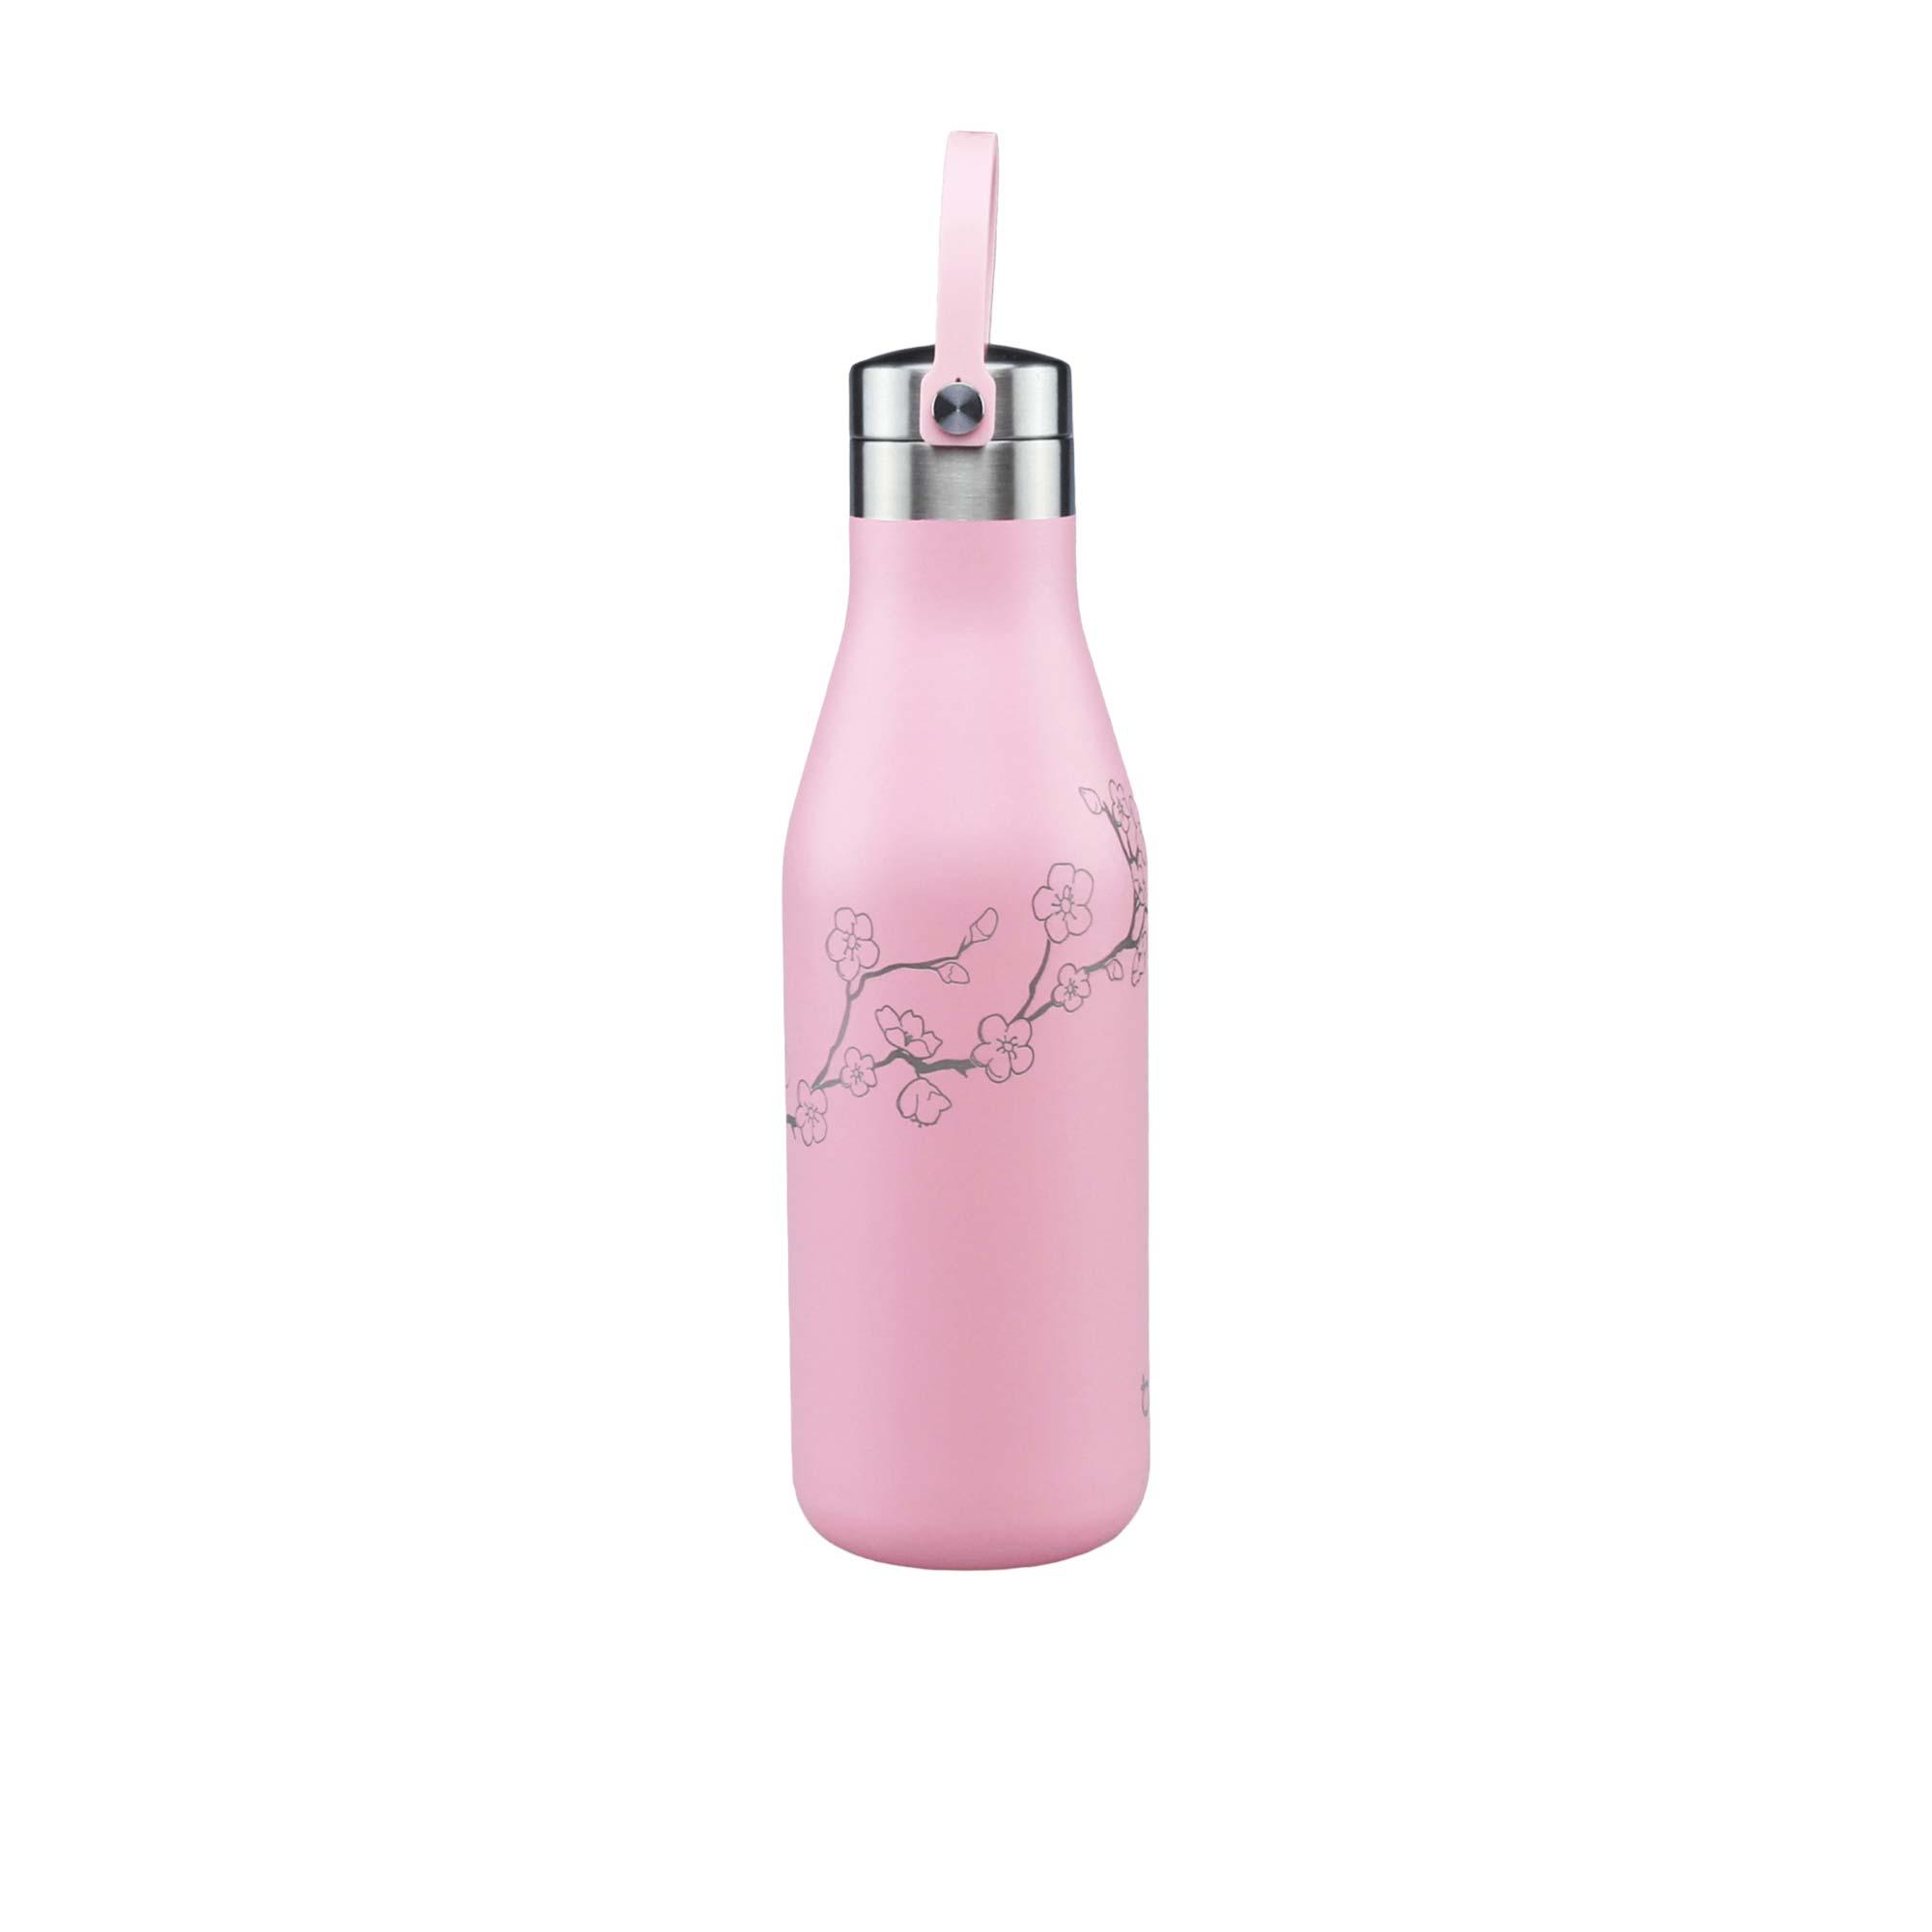 Ohelo Insulated Drink Bottle 500ml Pink Image 4